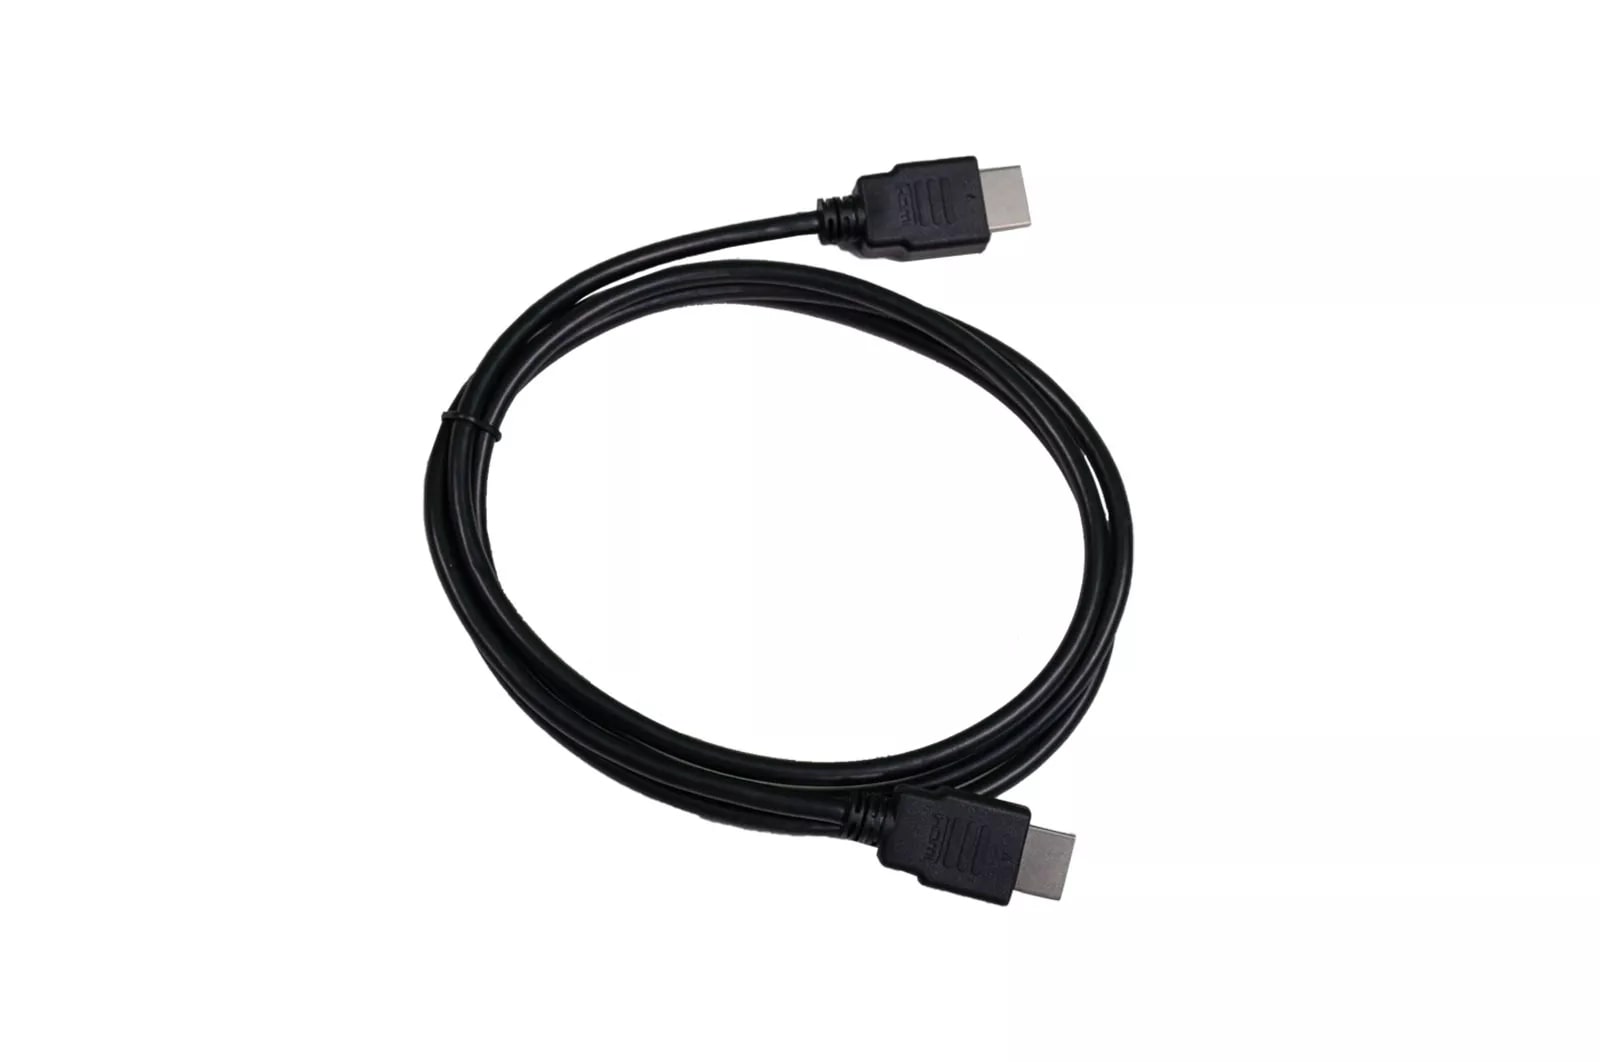 LG Monitor USB Type-C Cable EAD63932606